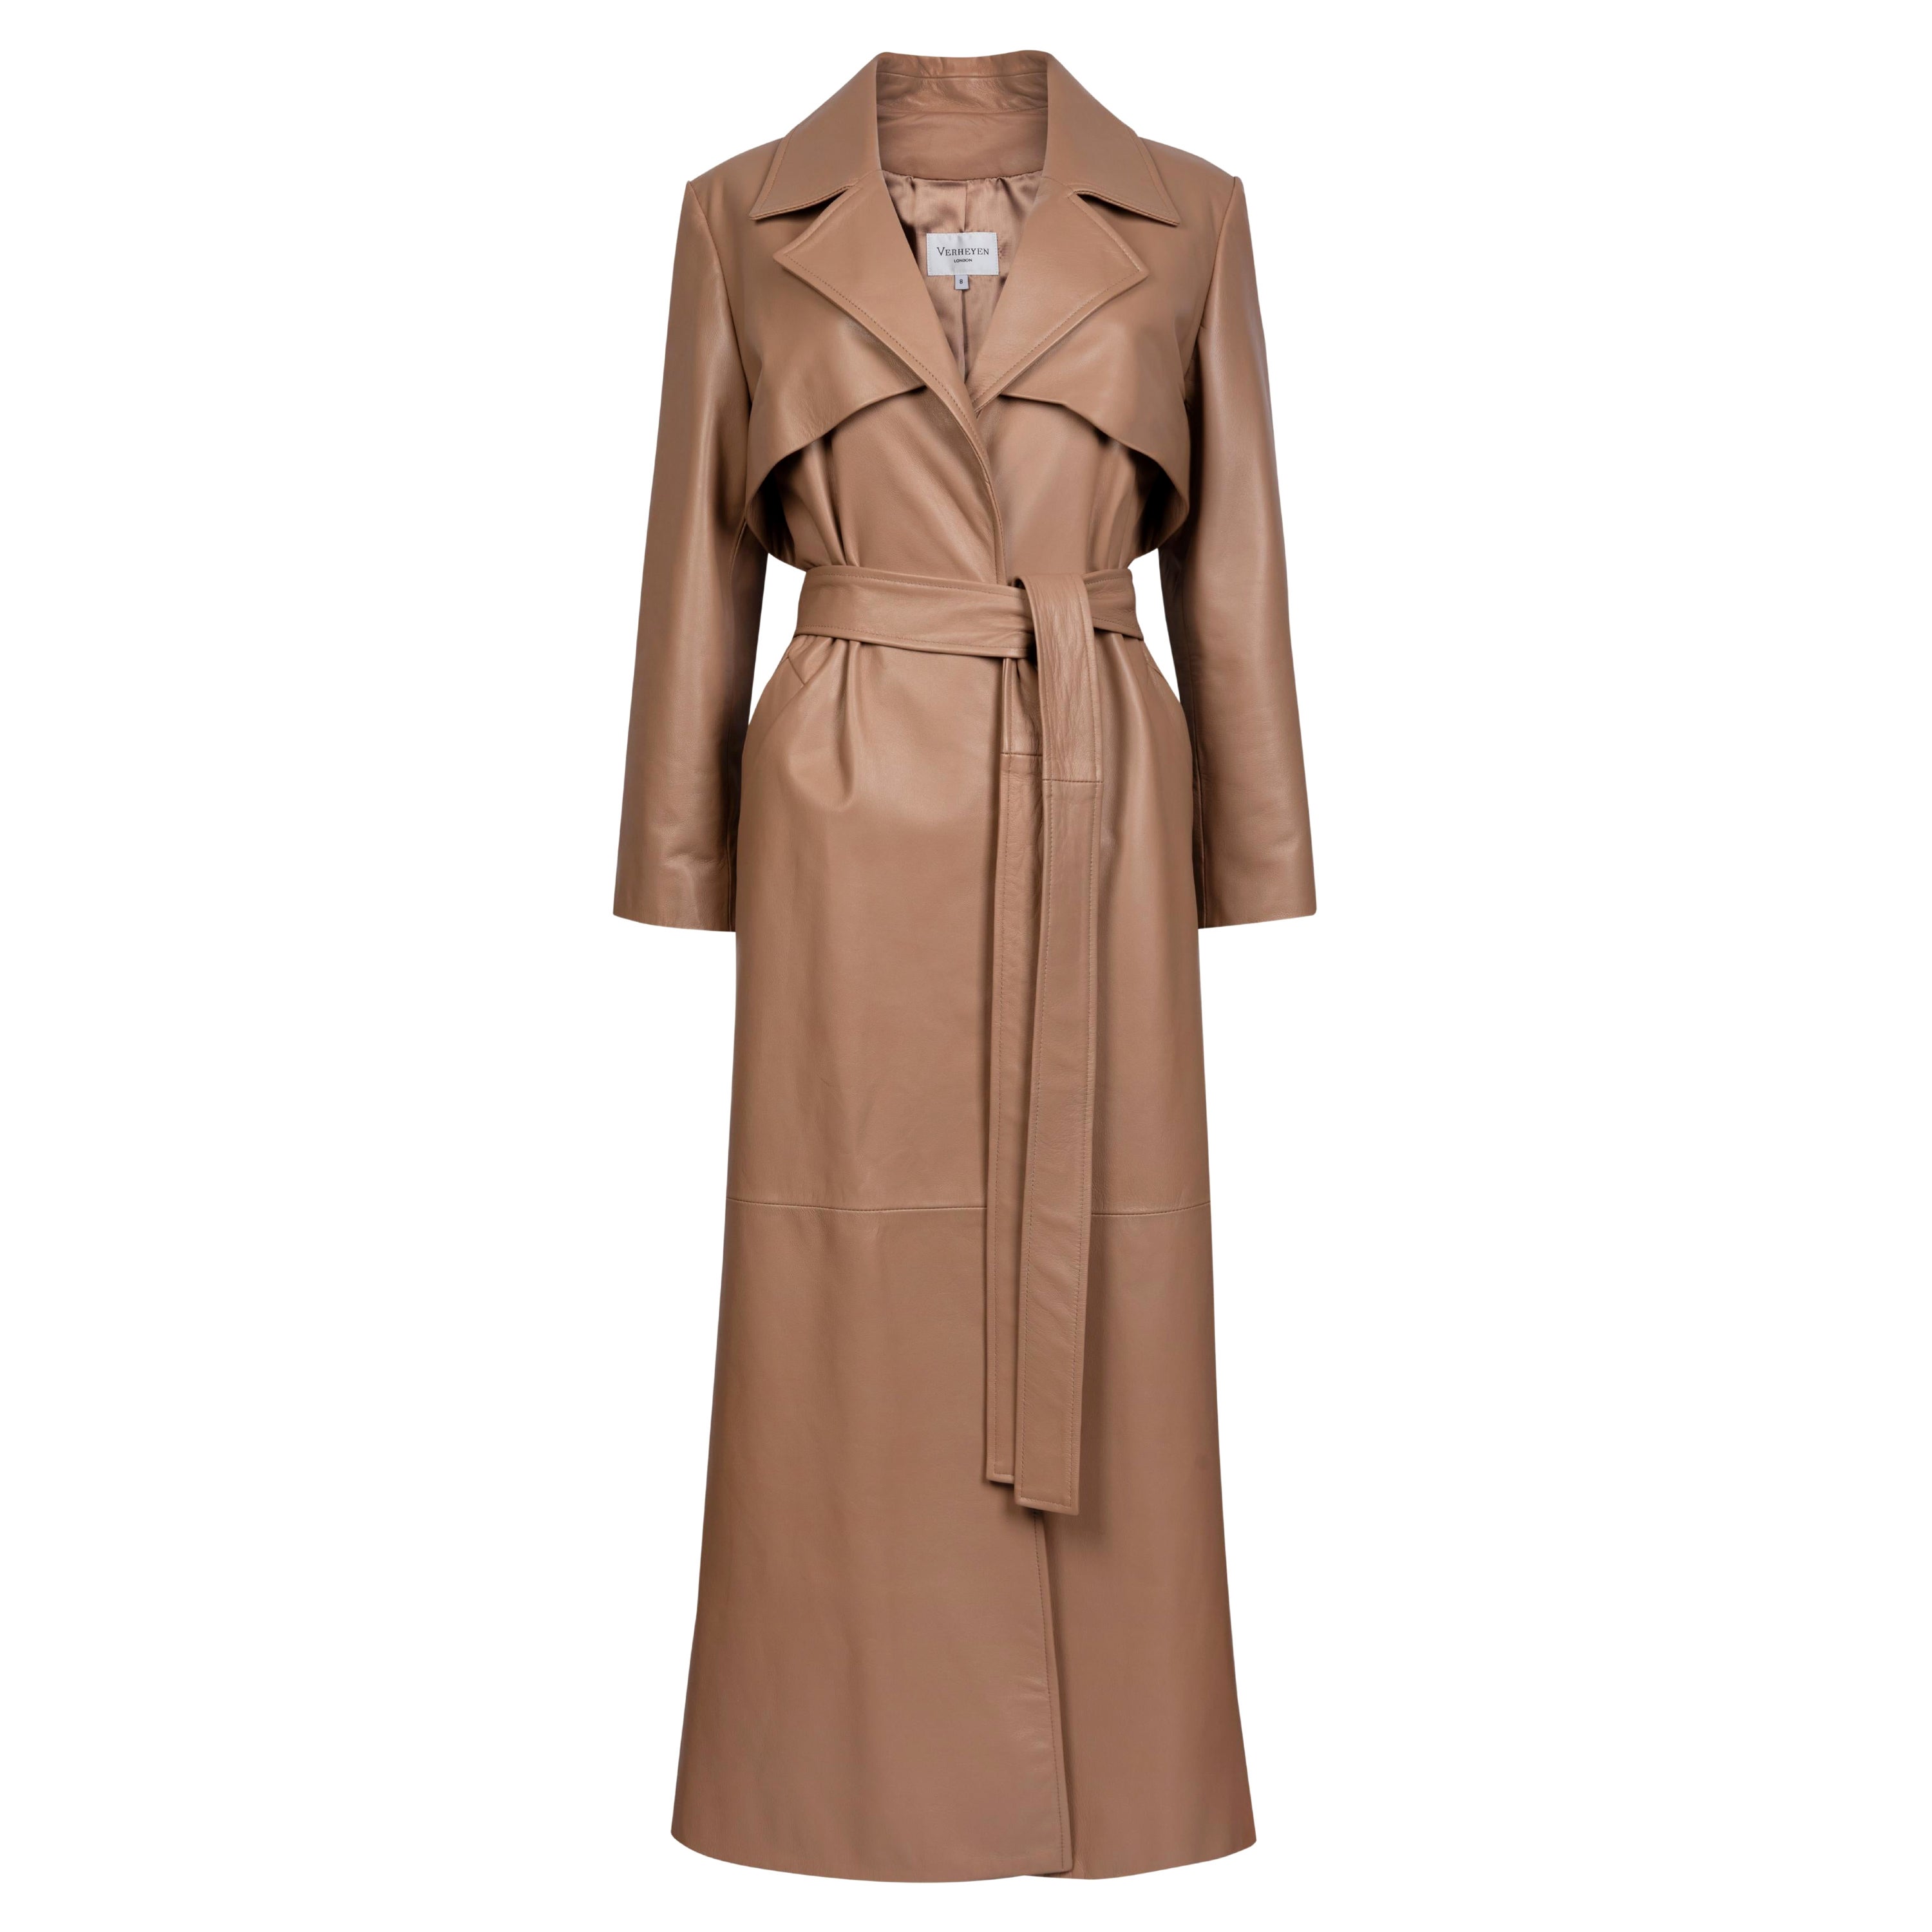 Verheyen London Leather Trench Coat in Taupe Brown - Size uk 8 For Sale